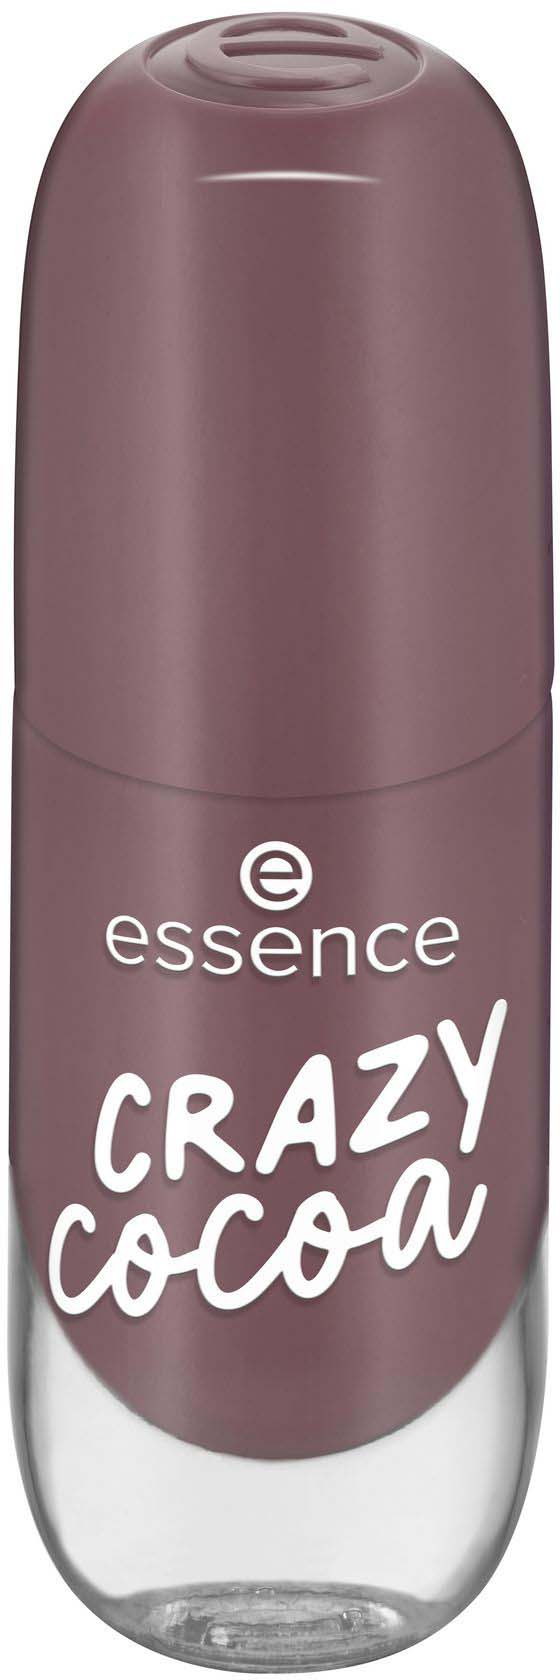 Oops I did it again - more Essence | Nail polish review - Howse Life